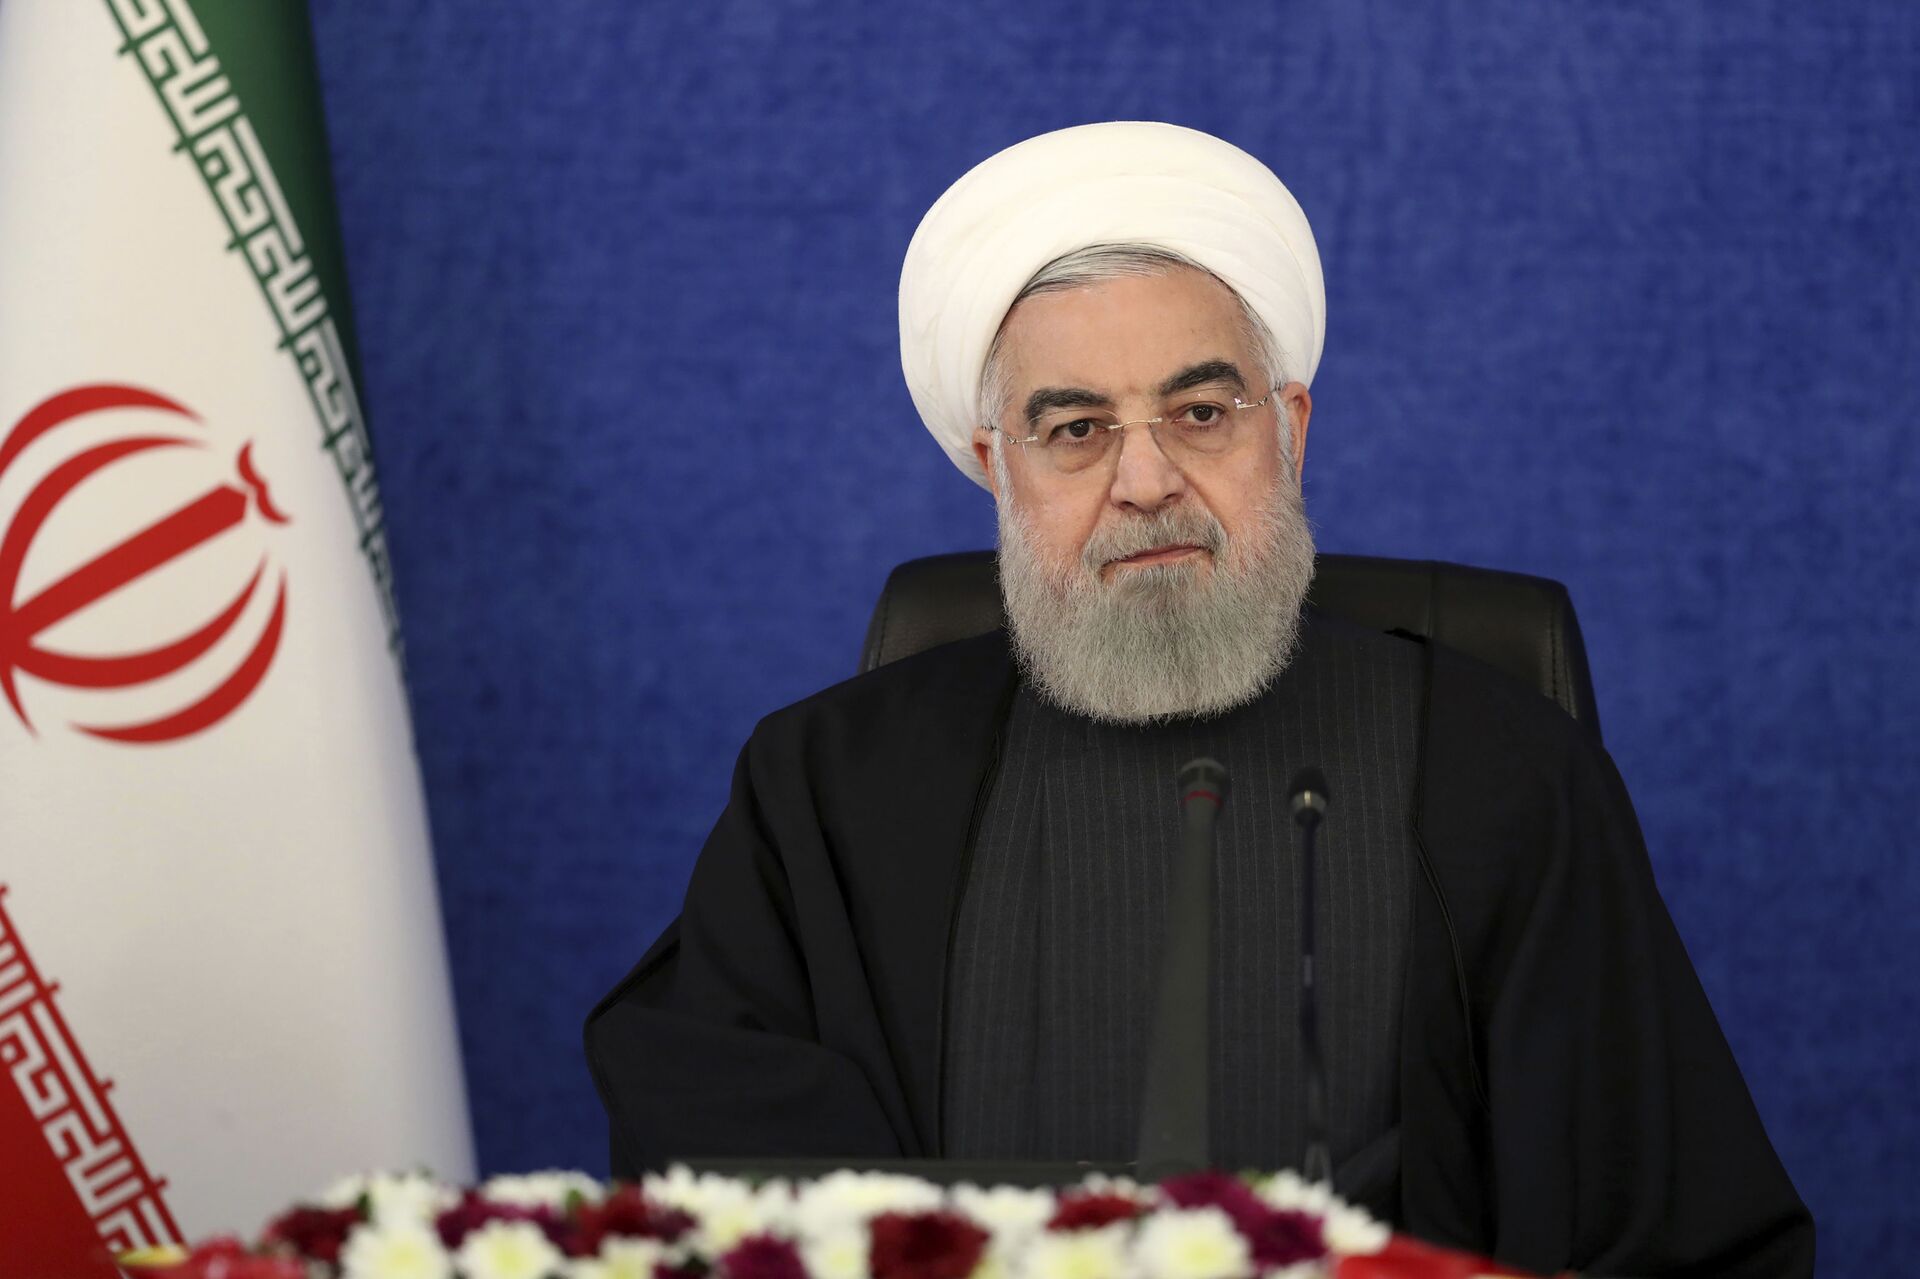 In this photo released by the official website of the office of the Iranian Presidency, President Hassan Rouhani attends a meeting in Tehran, Iran, Thursday, Jan. 7, 2021 - Sputnik International, 1920, 07.09.2021